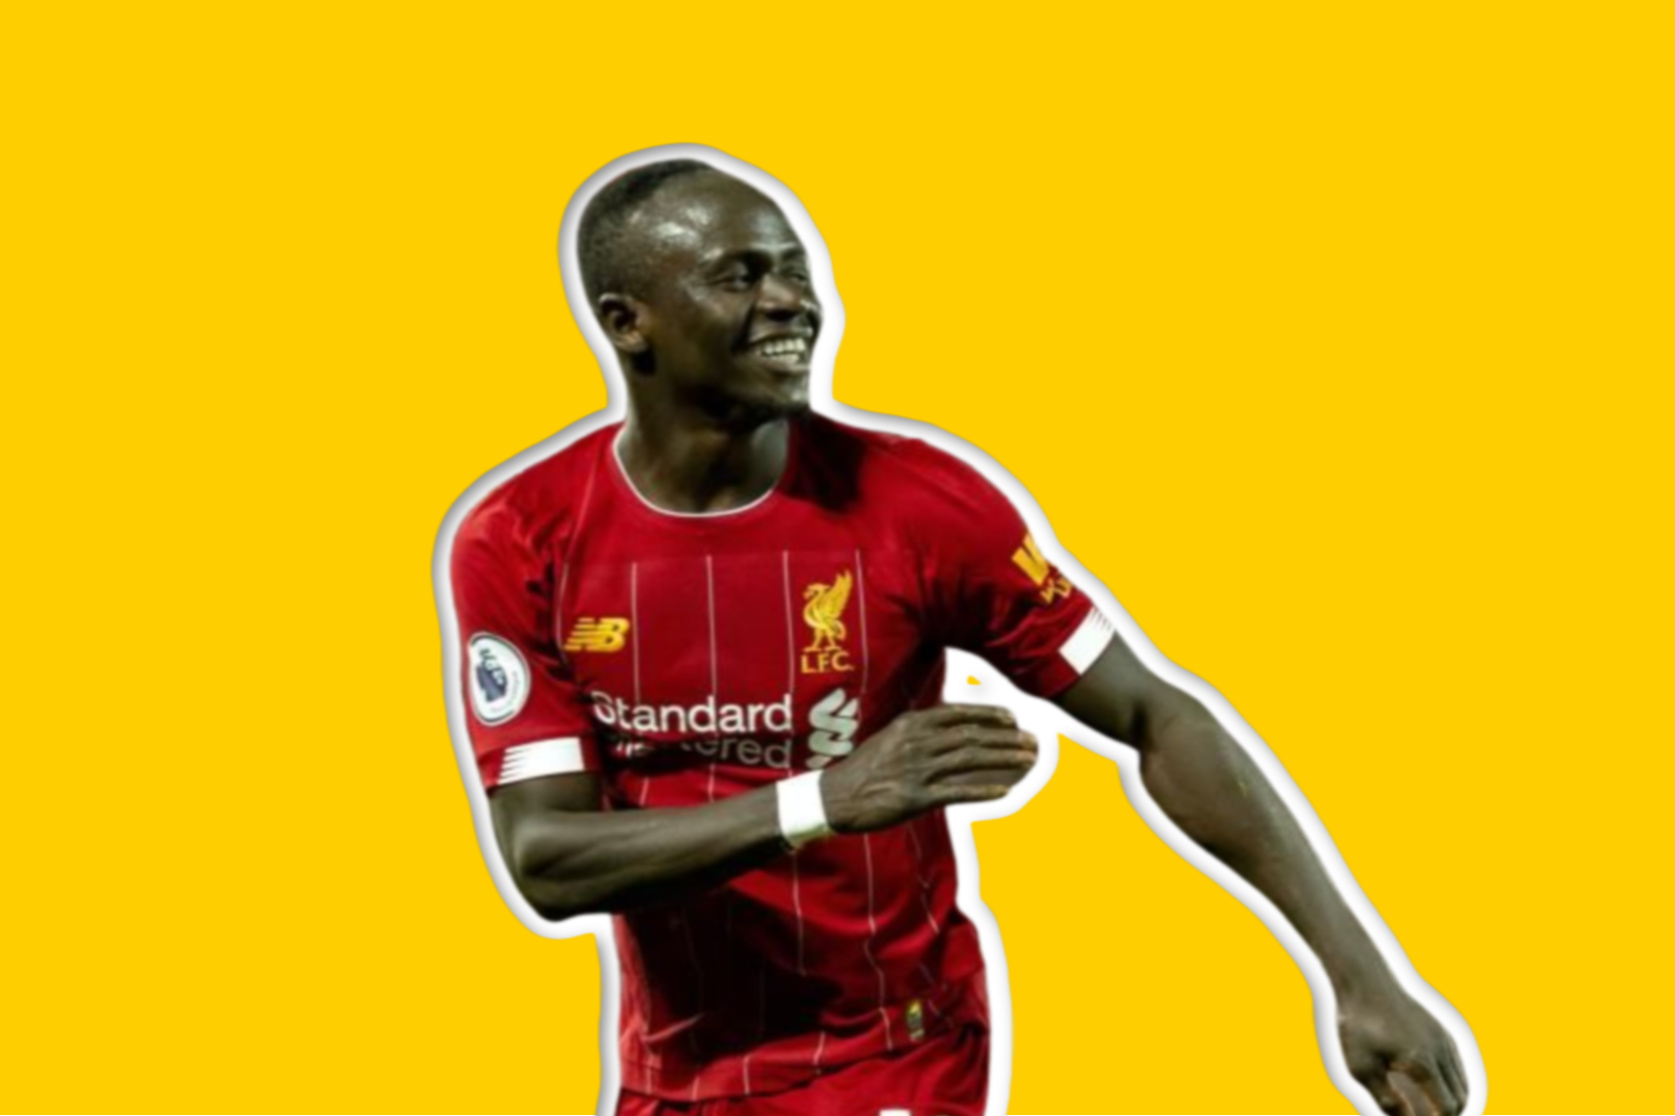 Bundesliga show-stopper confirms Sadio Mane is the best African player in football right now